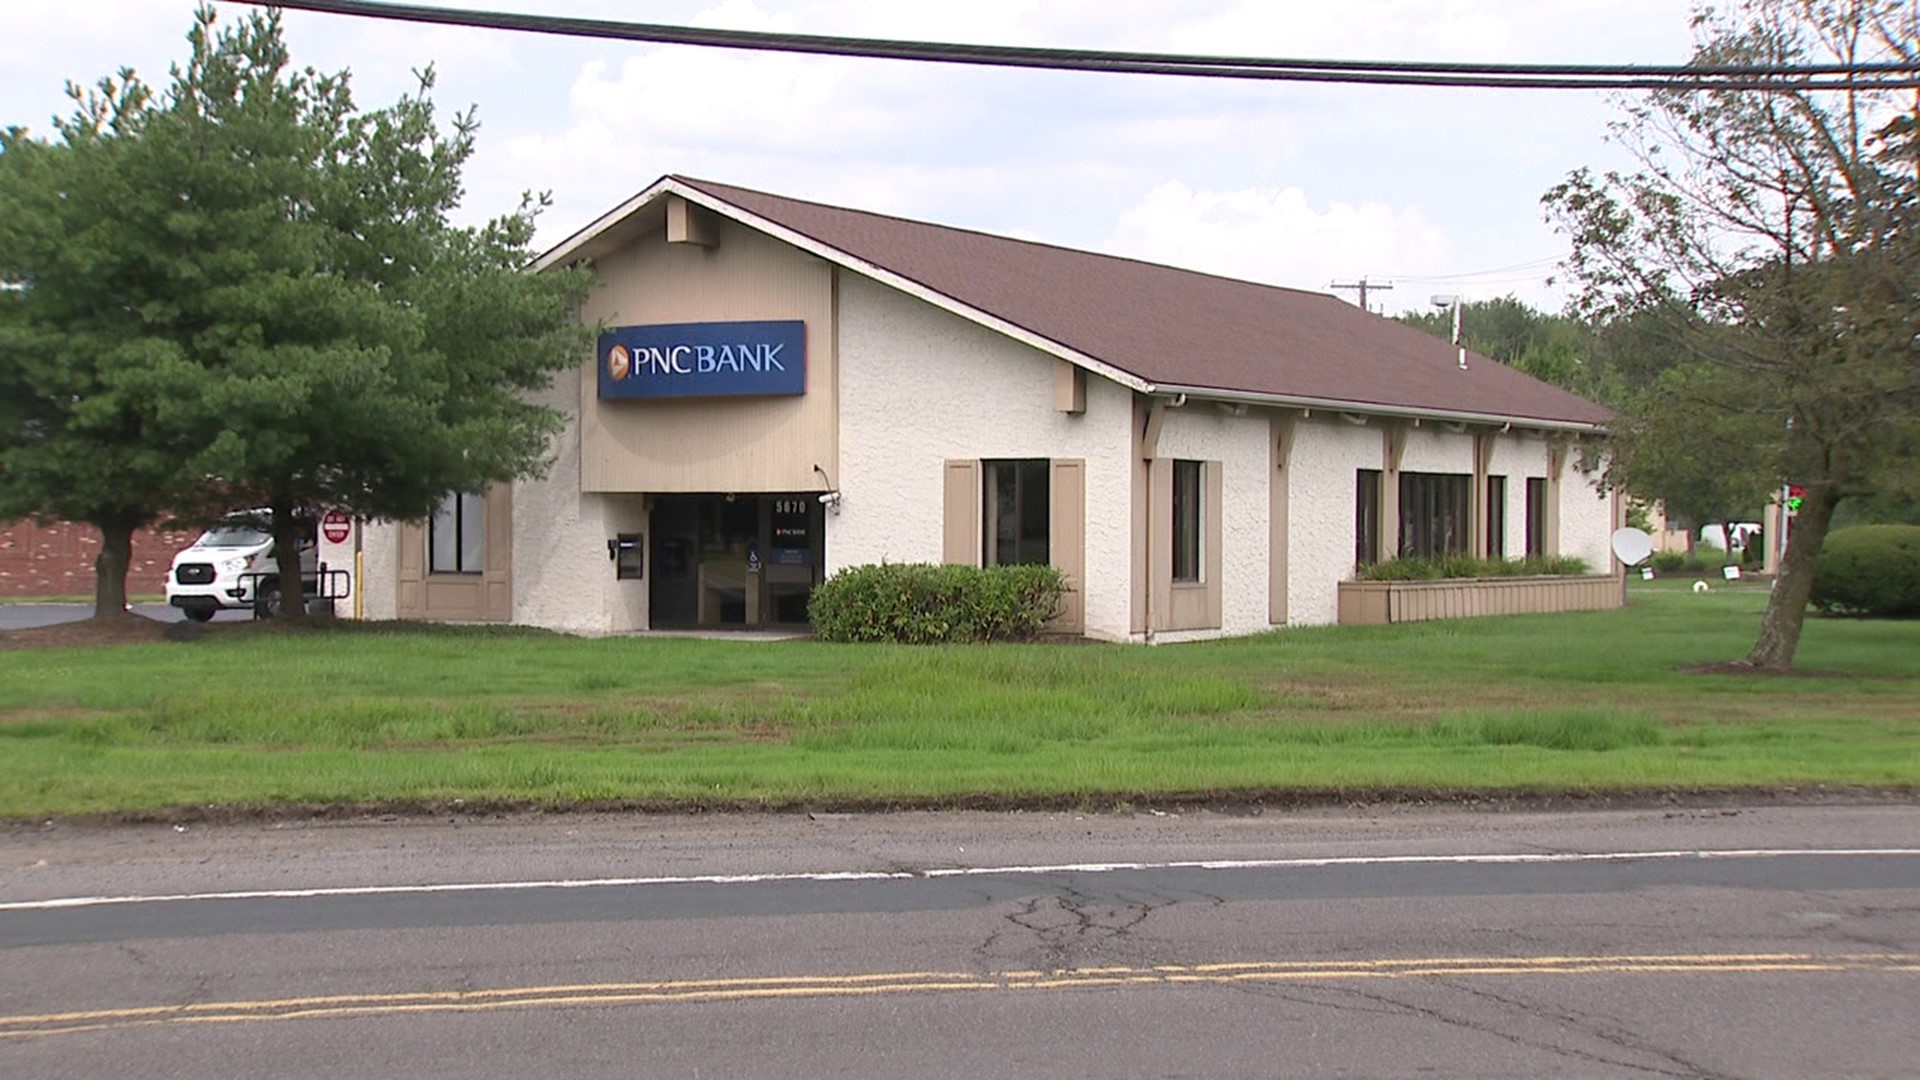 Police responded to the robbery at PNC Bank along Route 115 near Blakeslee just after 11 a.m. Saturday.